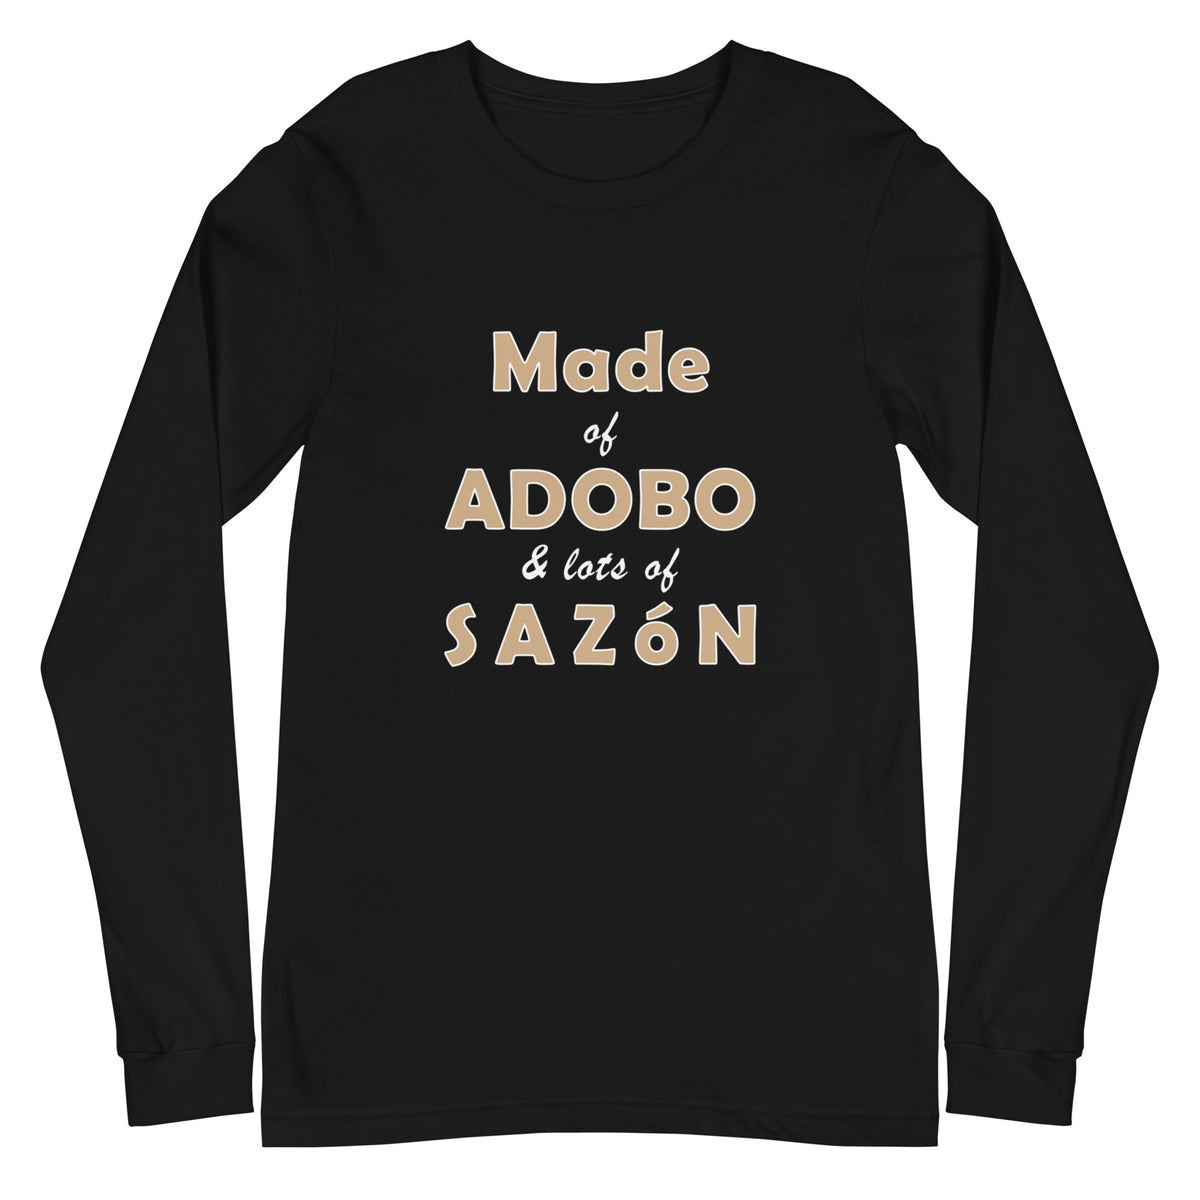 FEATURED - Made of Adobo and Lots of Sazón - Women's Racerback